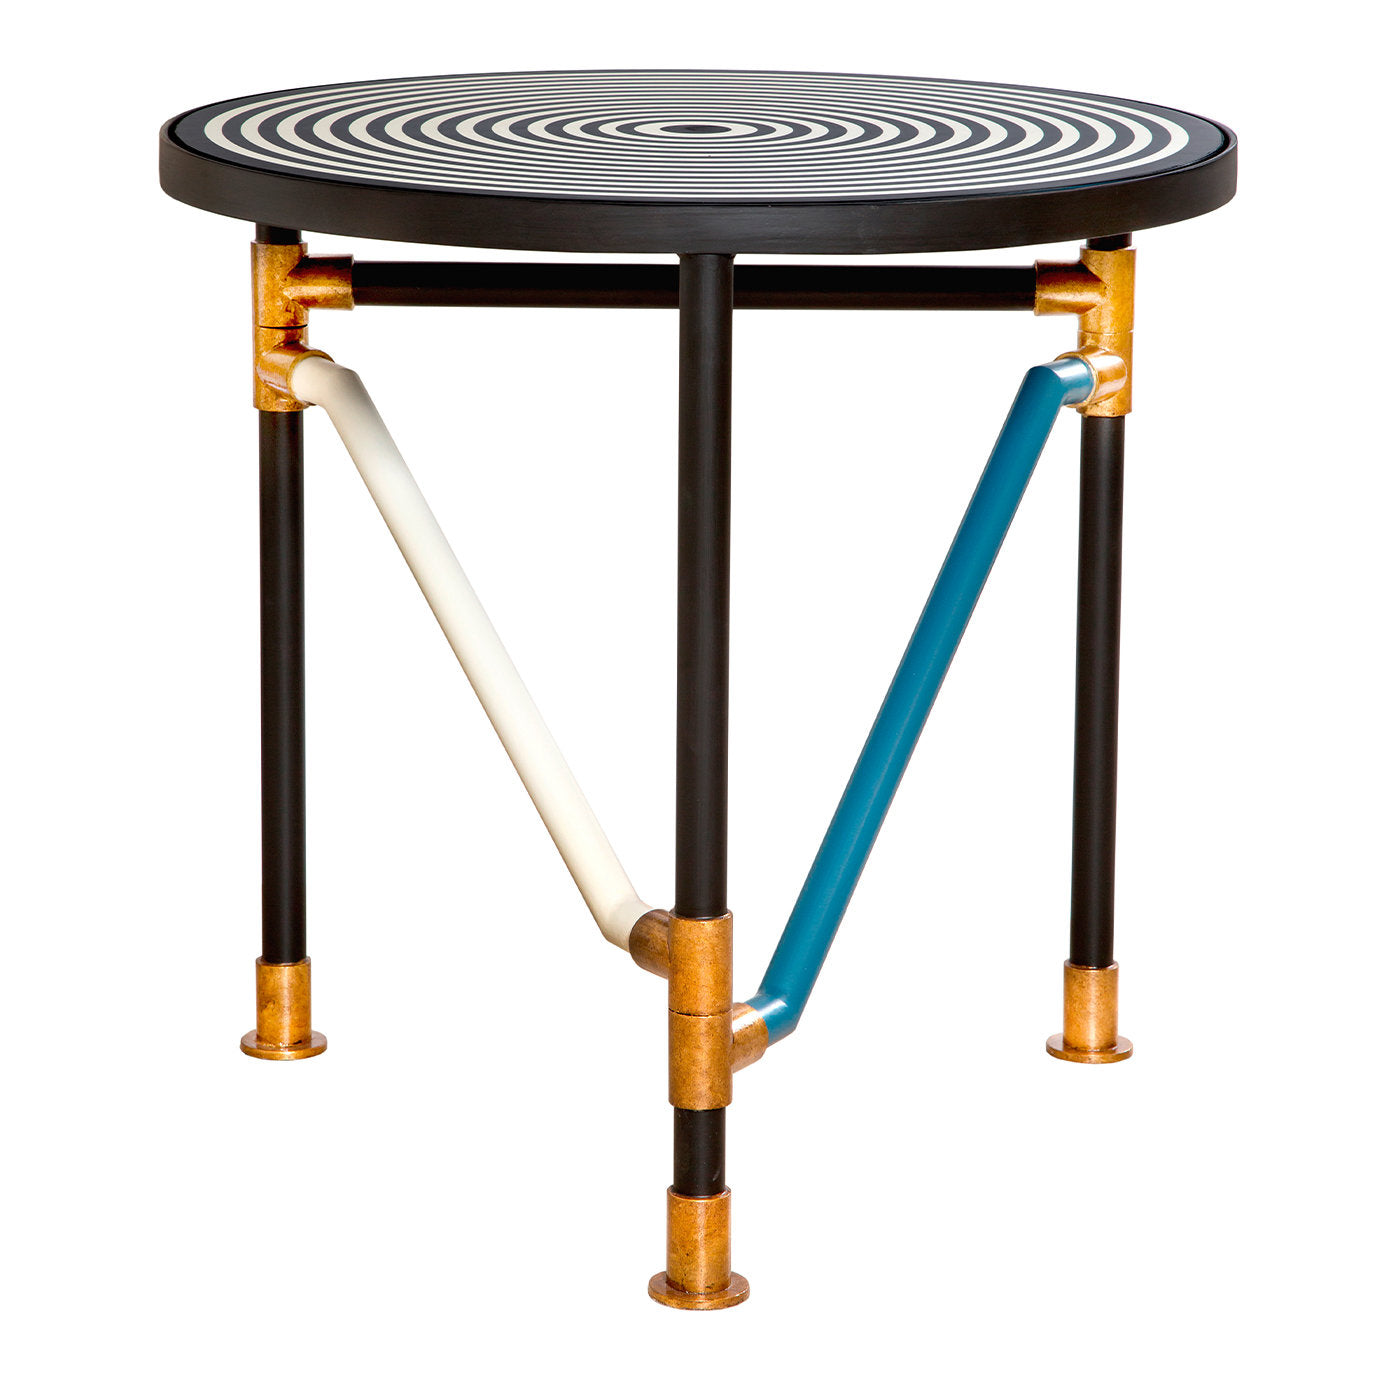 Concentrico Patterned Side Table - Alternative view 1